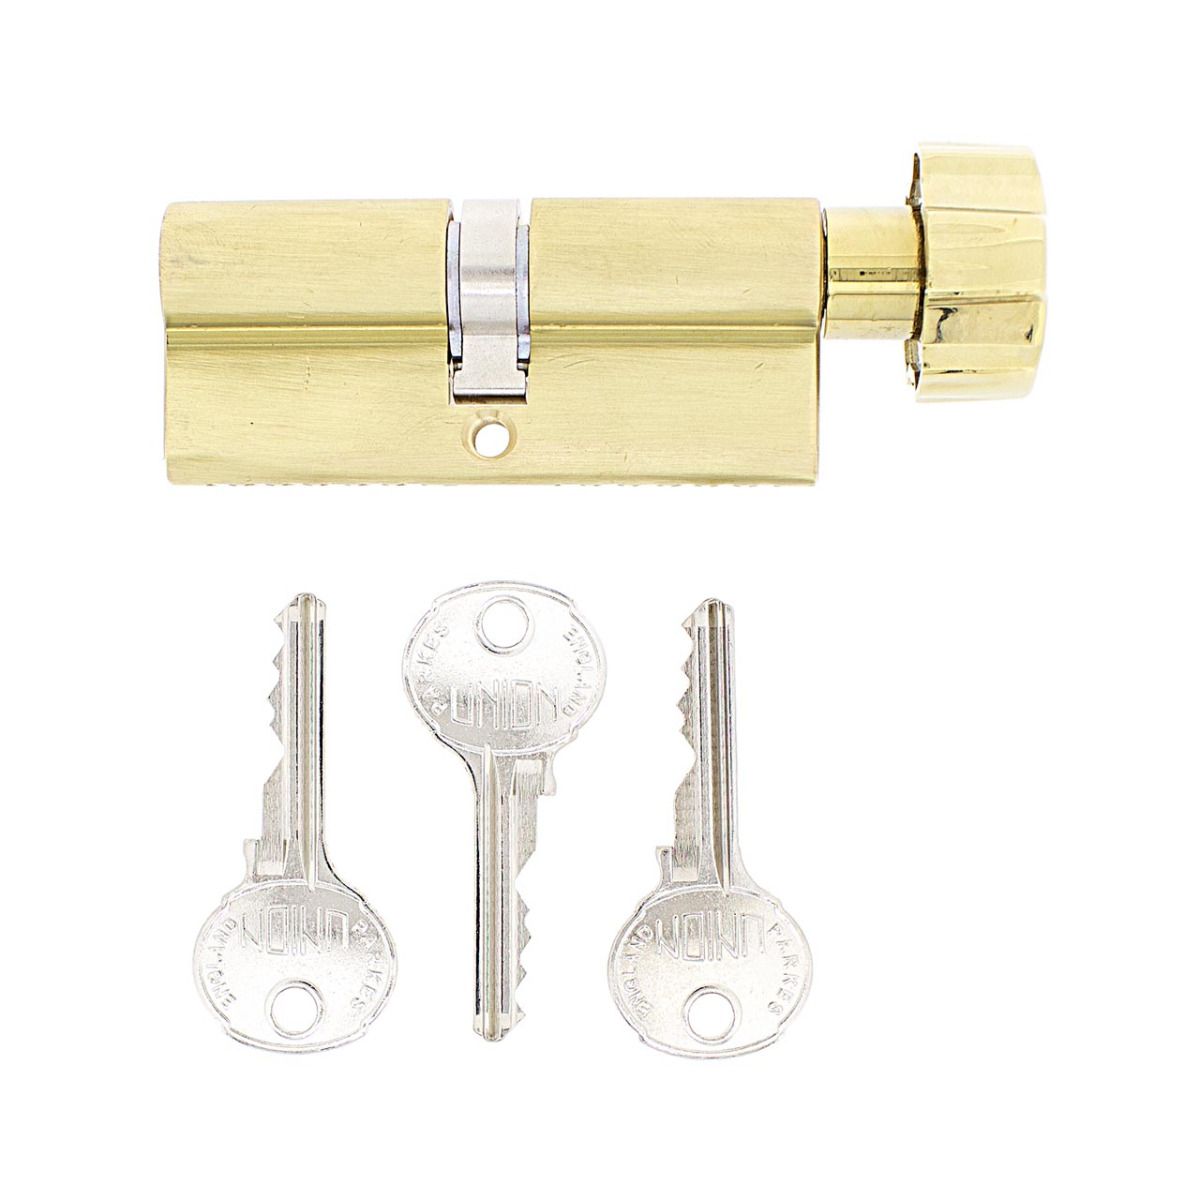 Dimensions Image: Union 2 x 19 Key and Turn Cylinder